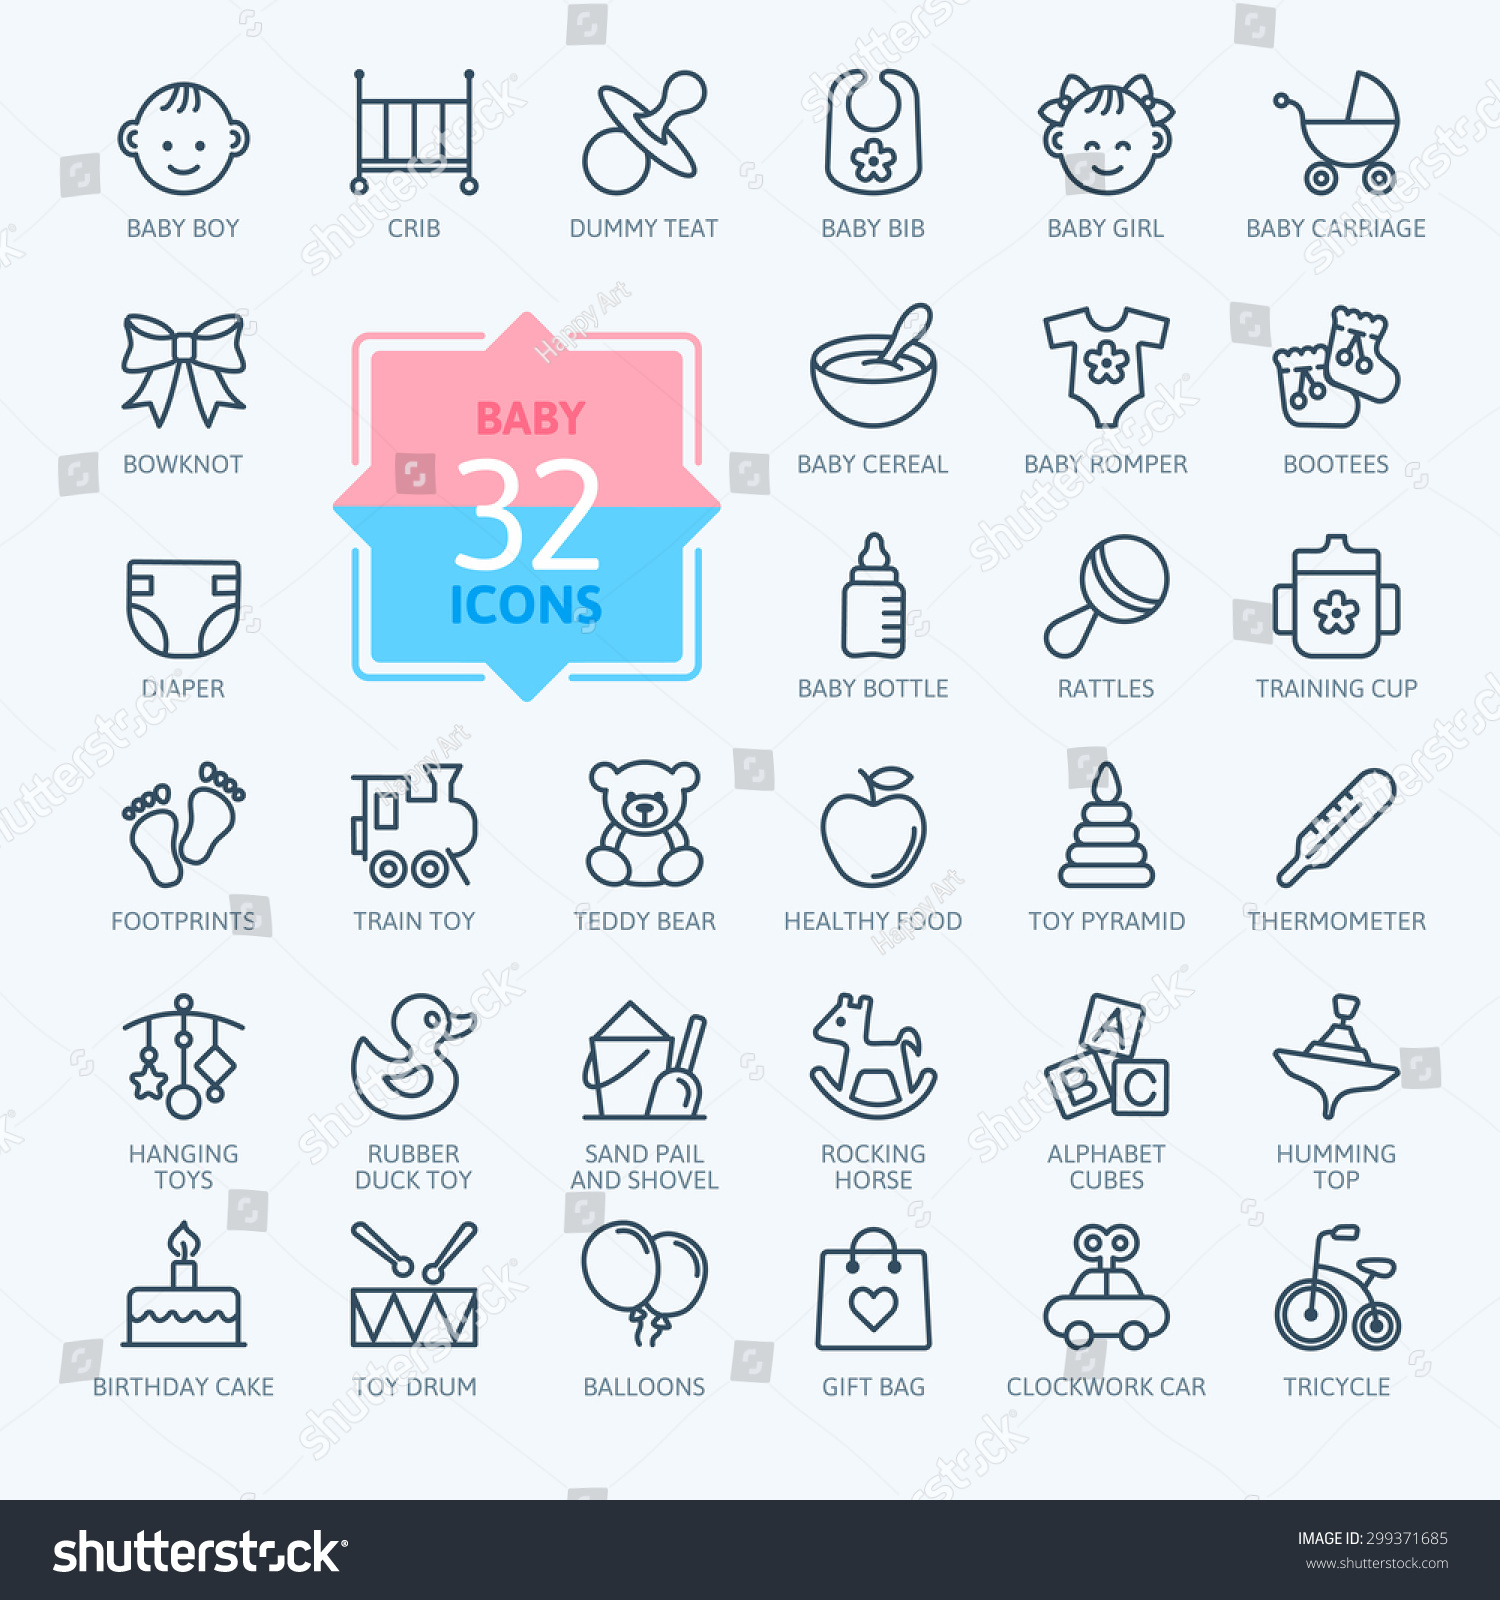 SVG of Outline web icon set. Baby toys, feeding and care svg